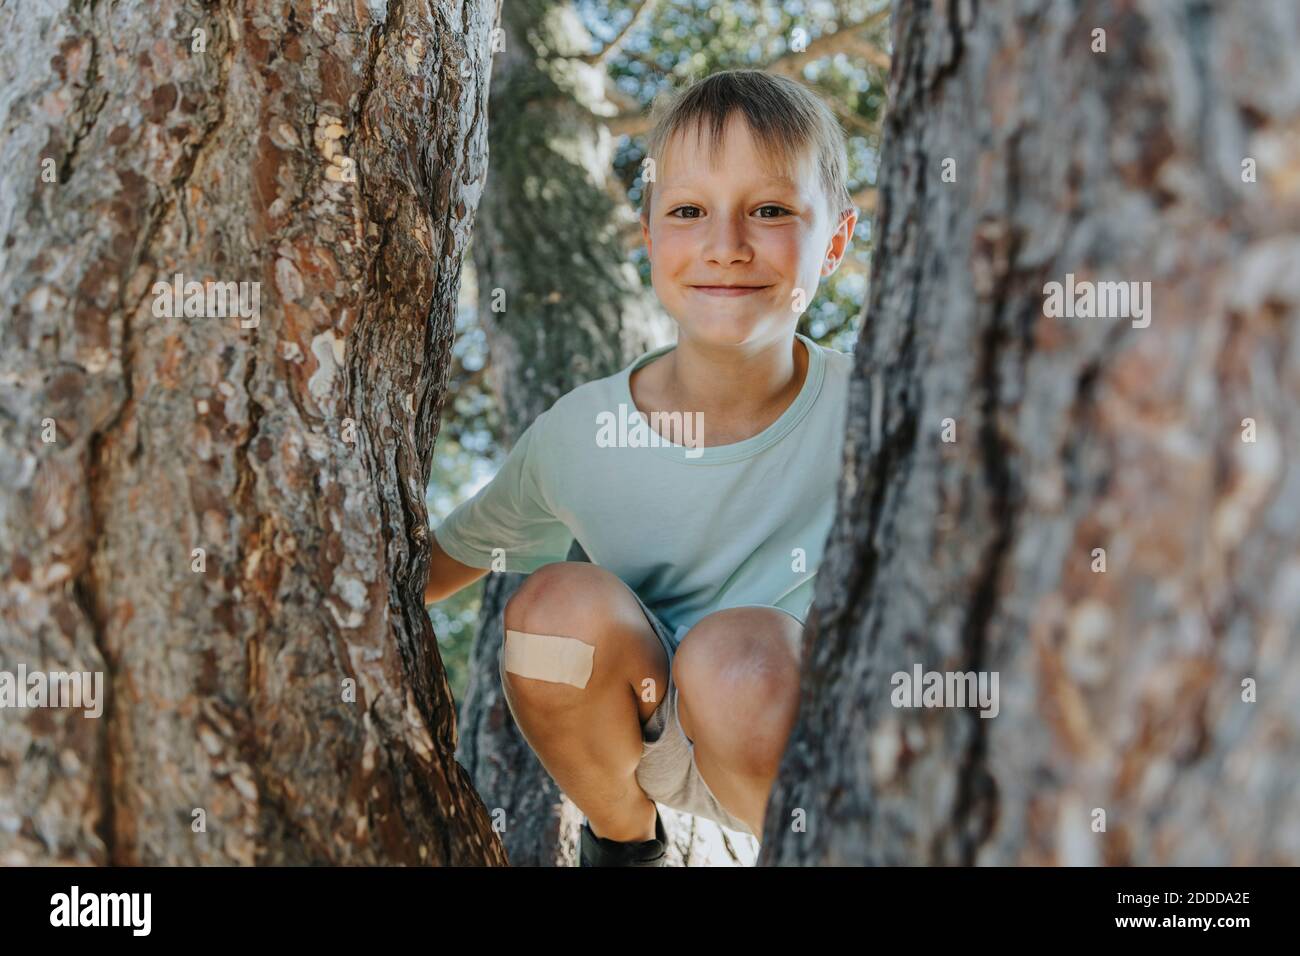 Boy peeking through branches of pine tree in public park on sunny day Stock Photo